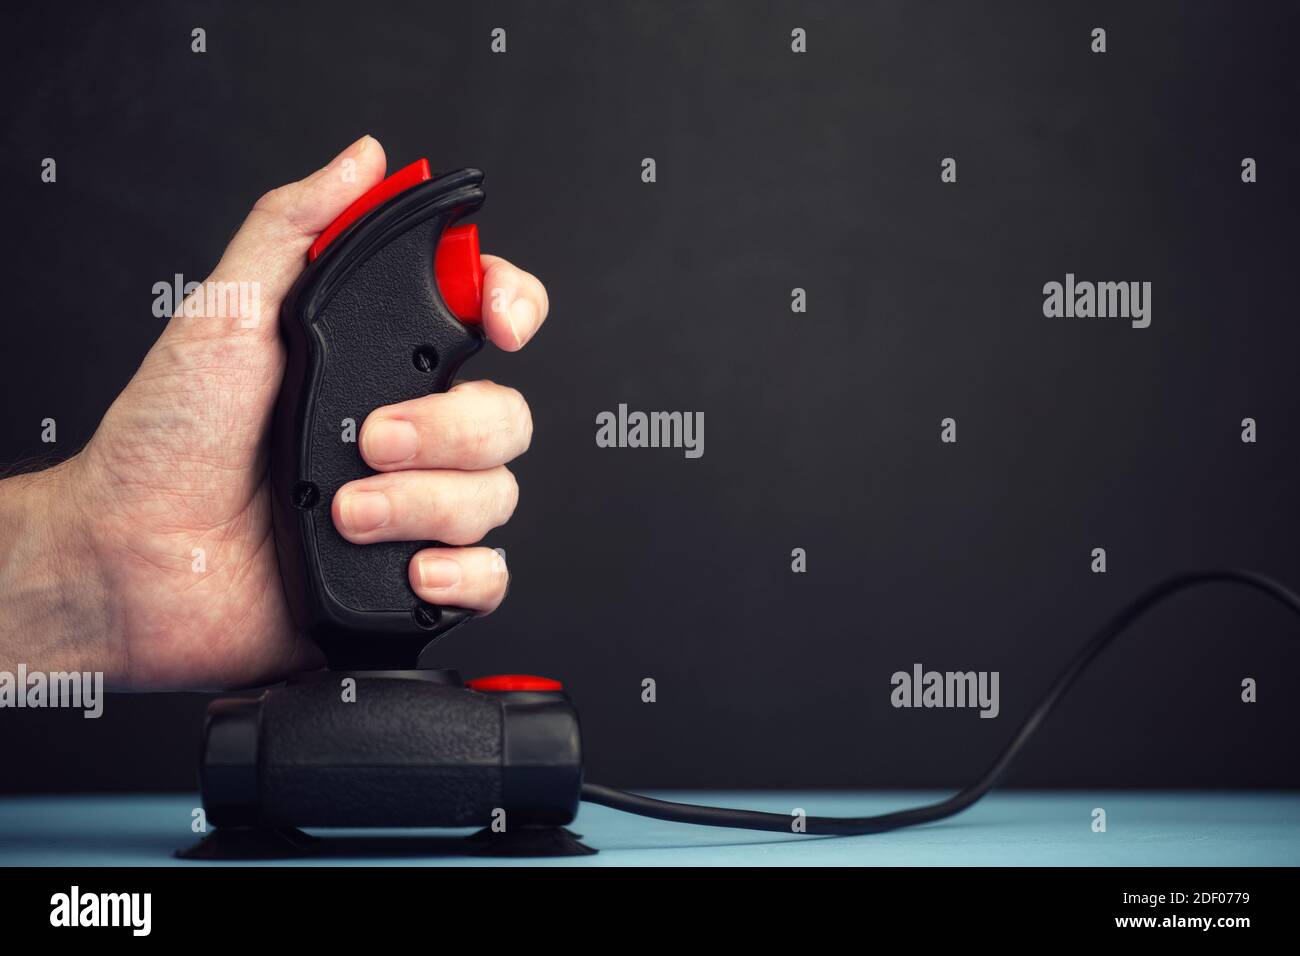 A person playing video games with a retro joystick from the mid-1980s. Close up. Stock Photo